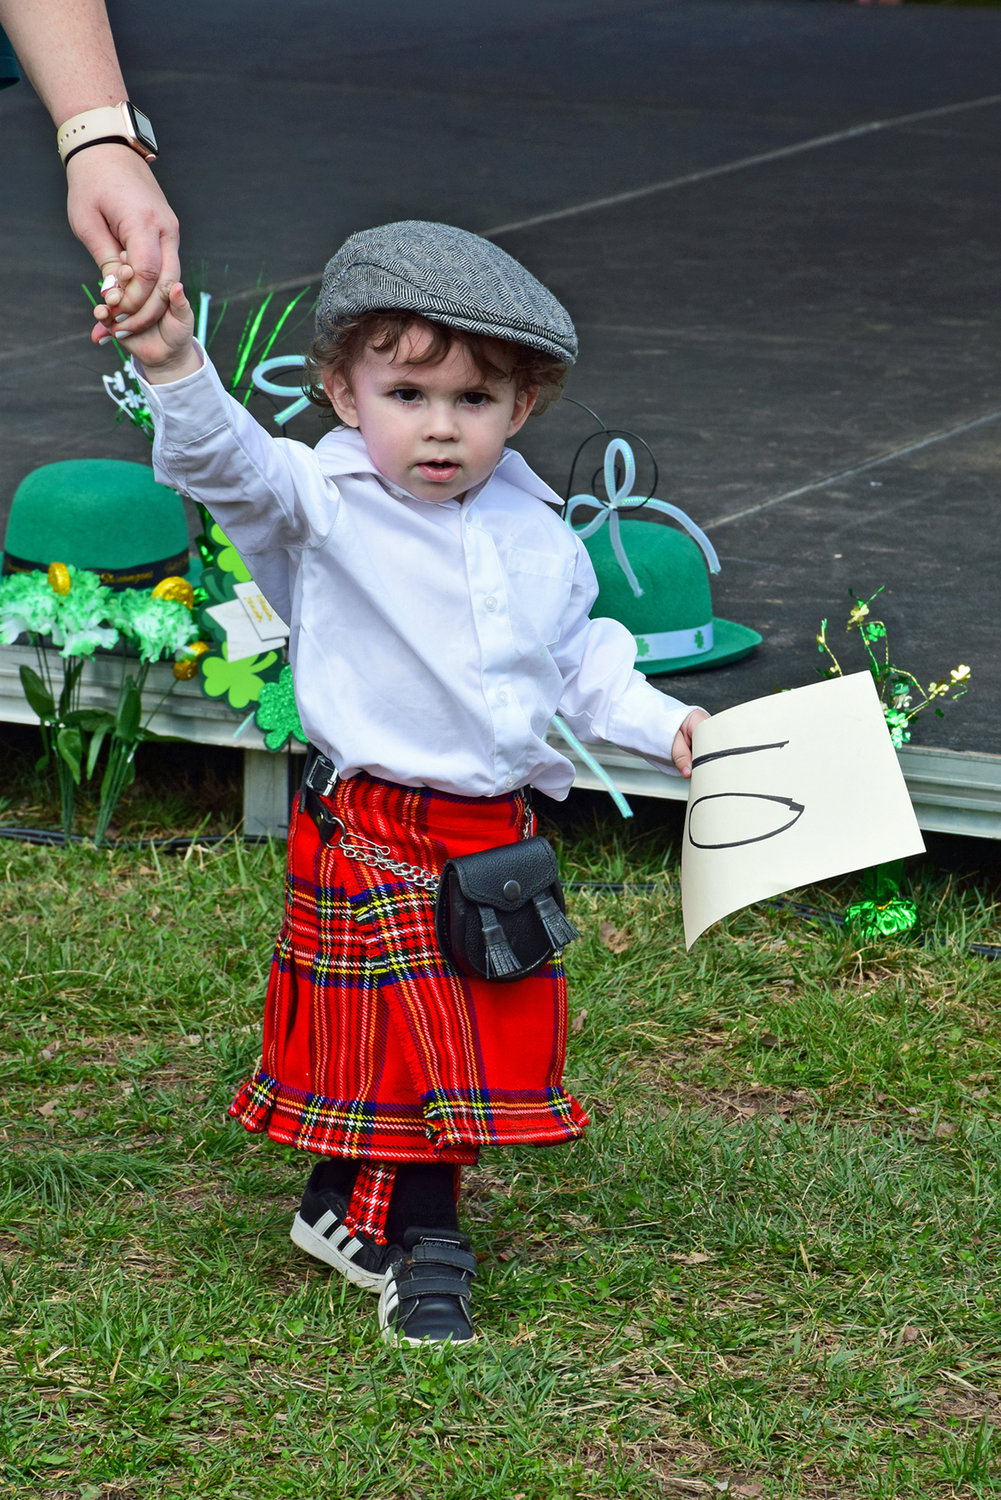 The youngest contestant in the kilt contest was Kieran McTeal of Quakertown.